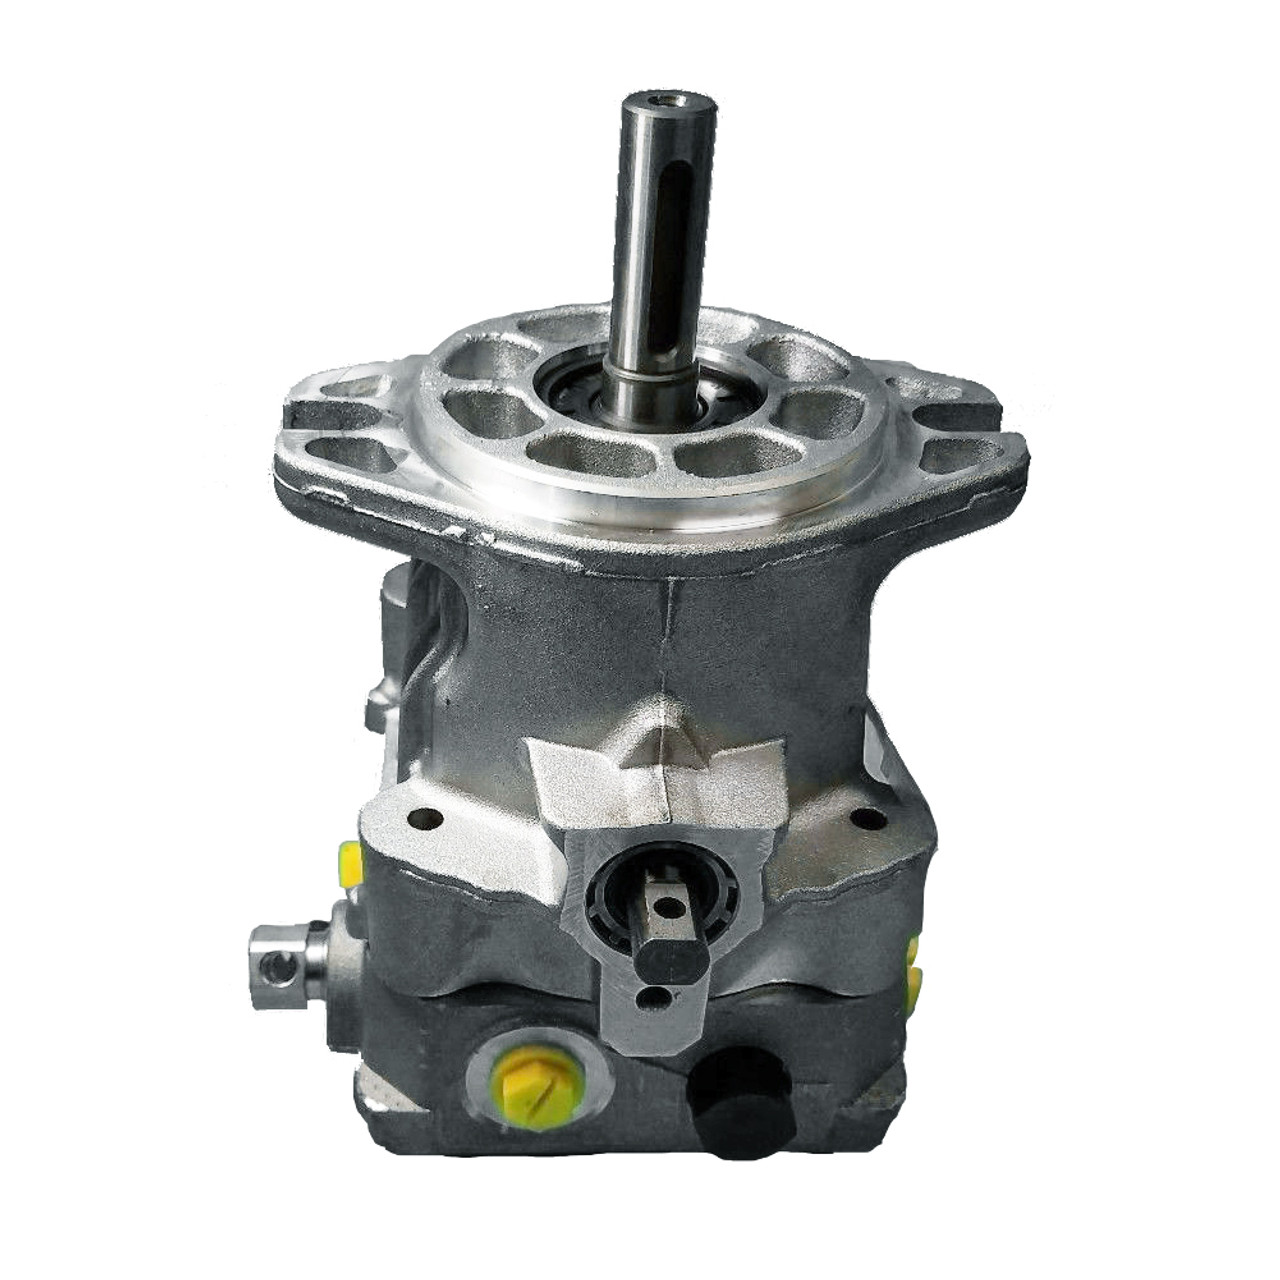 Hydro Gear Replacement Pump PG-1GCC-DY1X-XXXX / Husqvarna Lawn Mowers & Others 539108246, 482644, BDP-10A-419 / 2 Pack